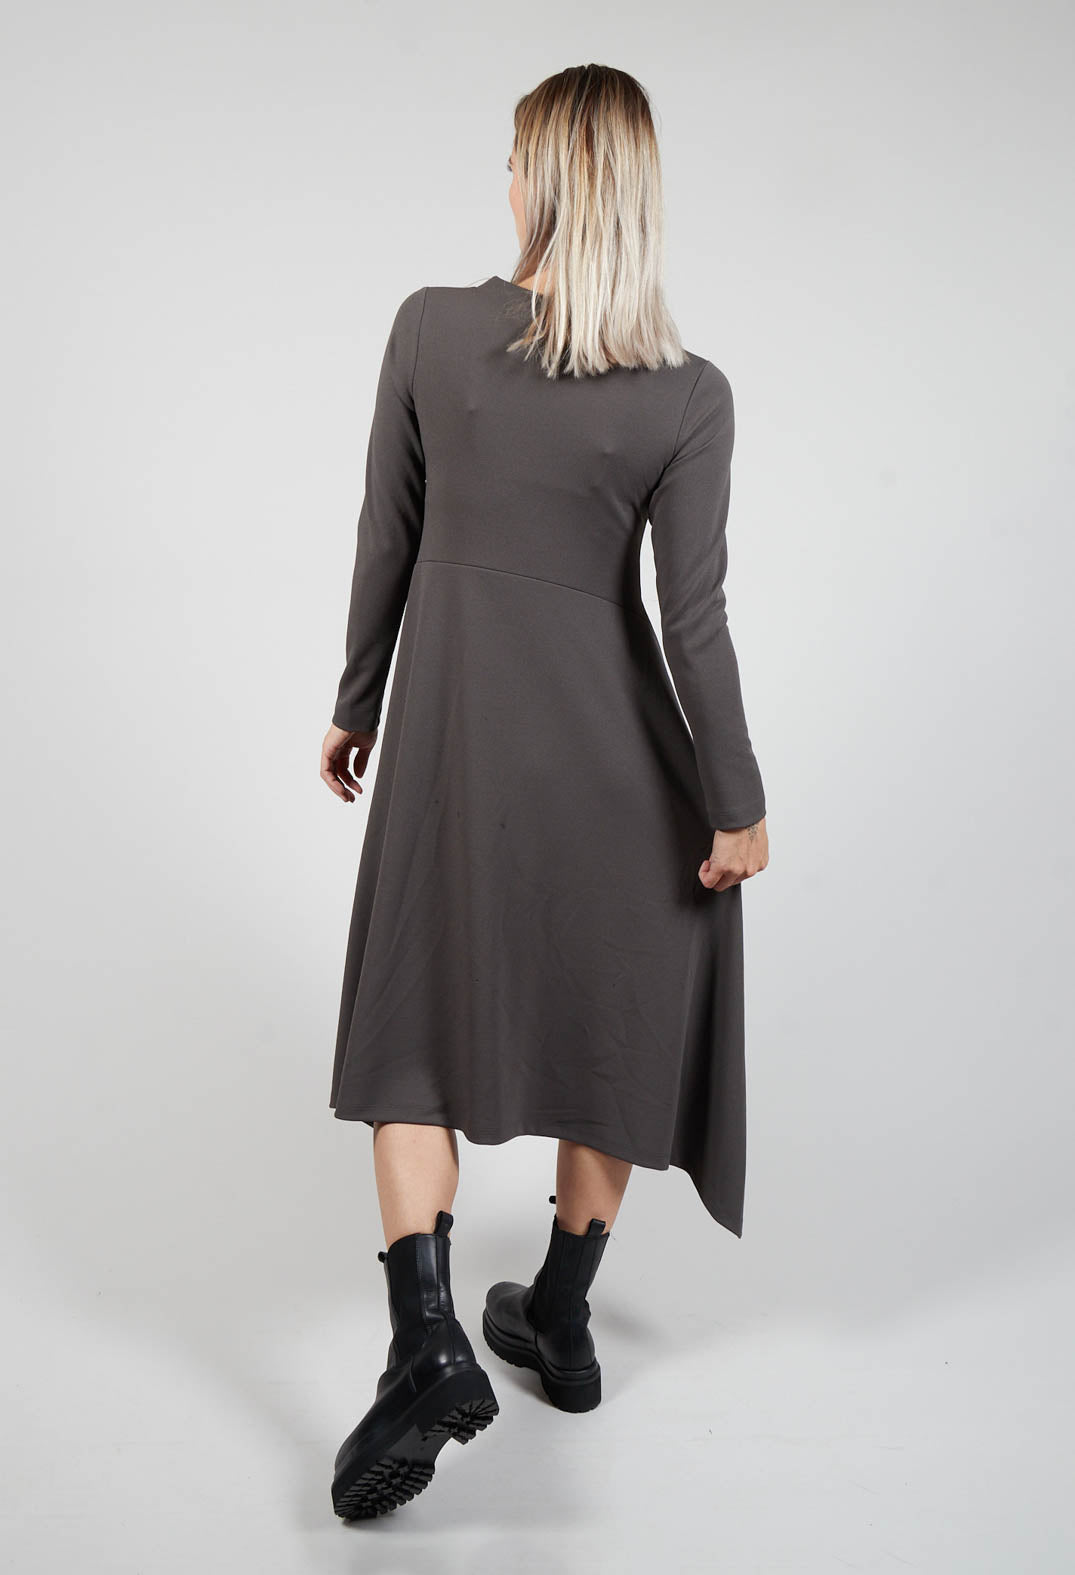 Long Sleeve Dress with Front Splits in Grey